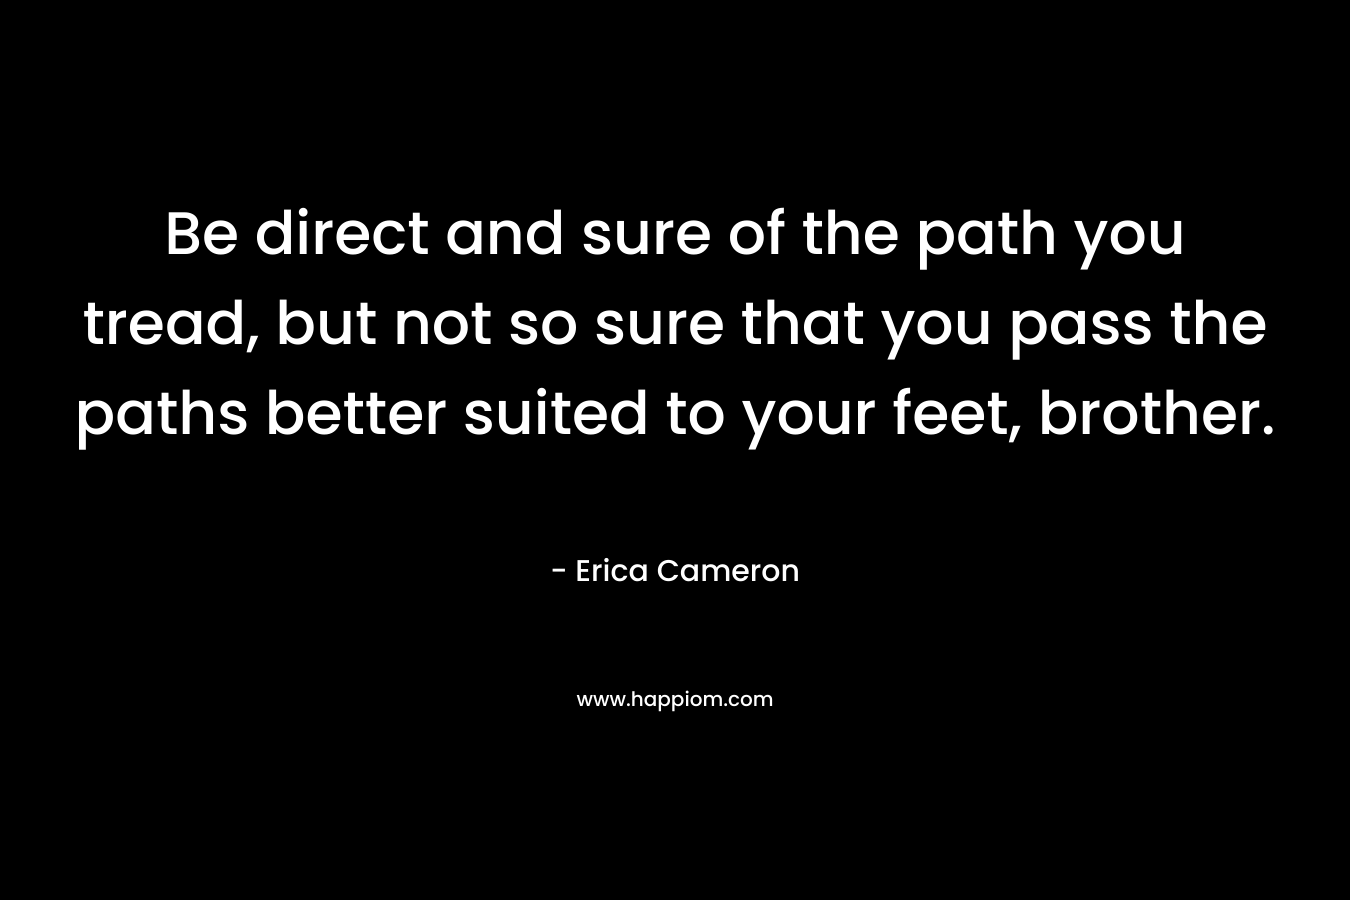 Be direct and sure of the path you tread, but not so sure that you pass the paths better suited to your feet, brother. – Erica Cameron